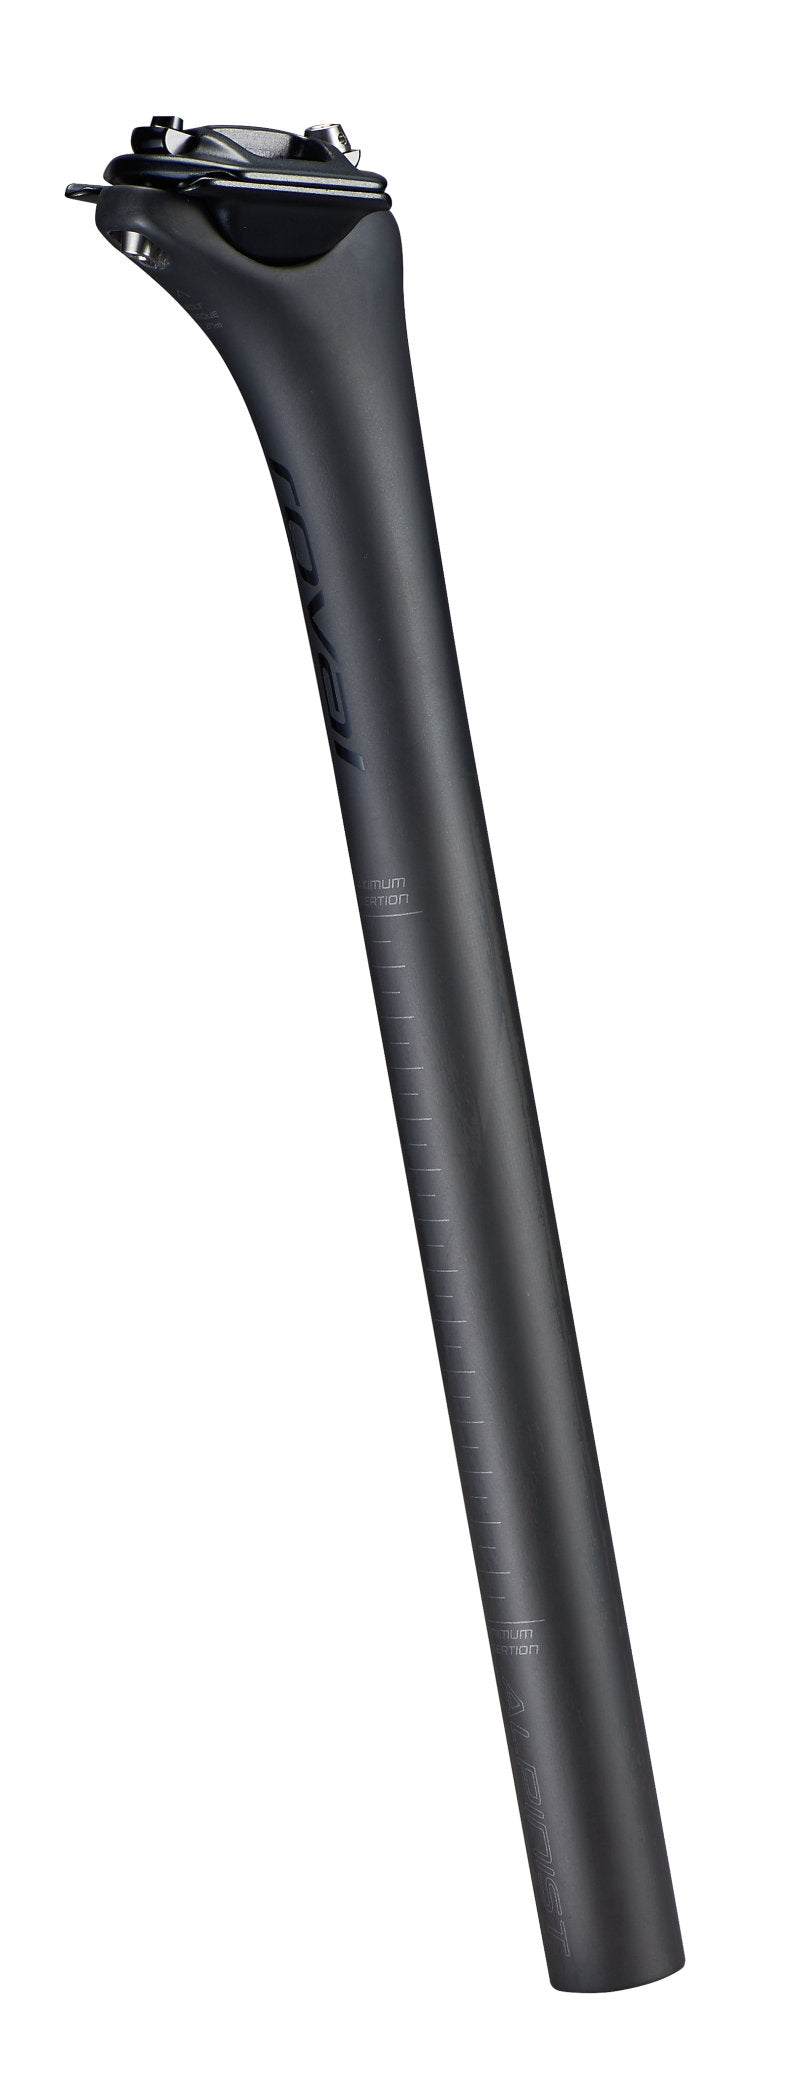 Specialized Alpinist Bicycle Seatpost